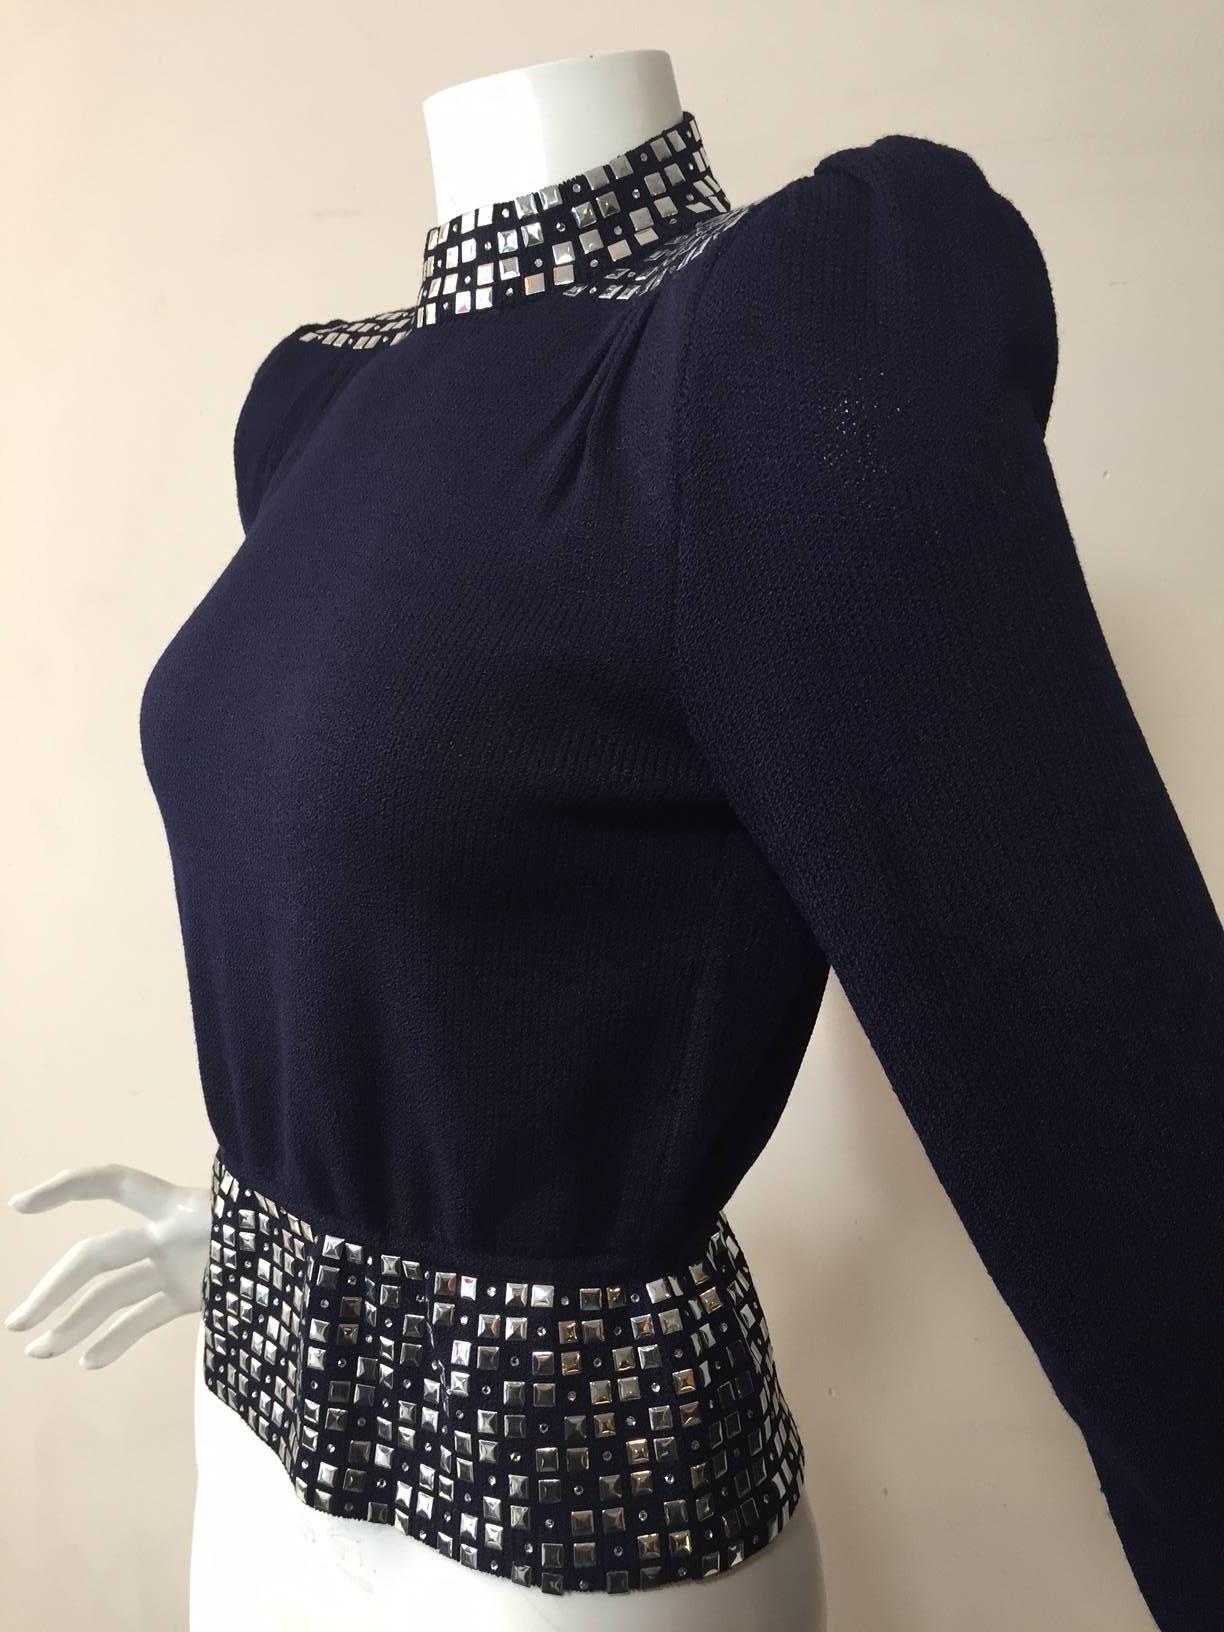 Black 1970s St. John Evening Midnight Blue Rayon Knit Top with Silver Studs